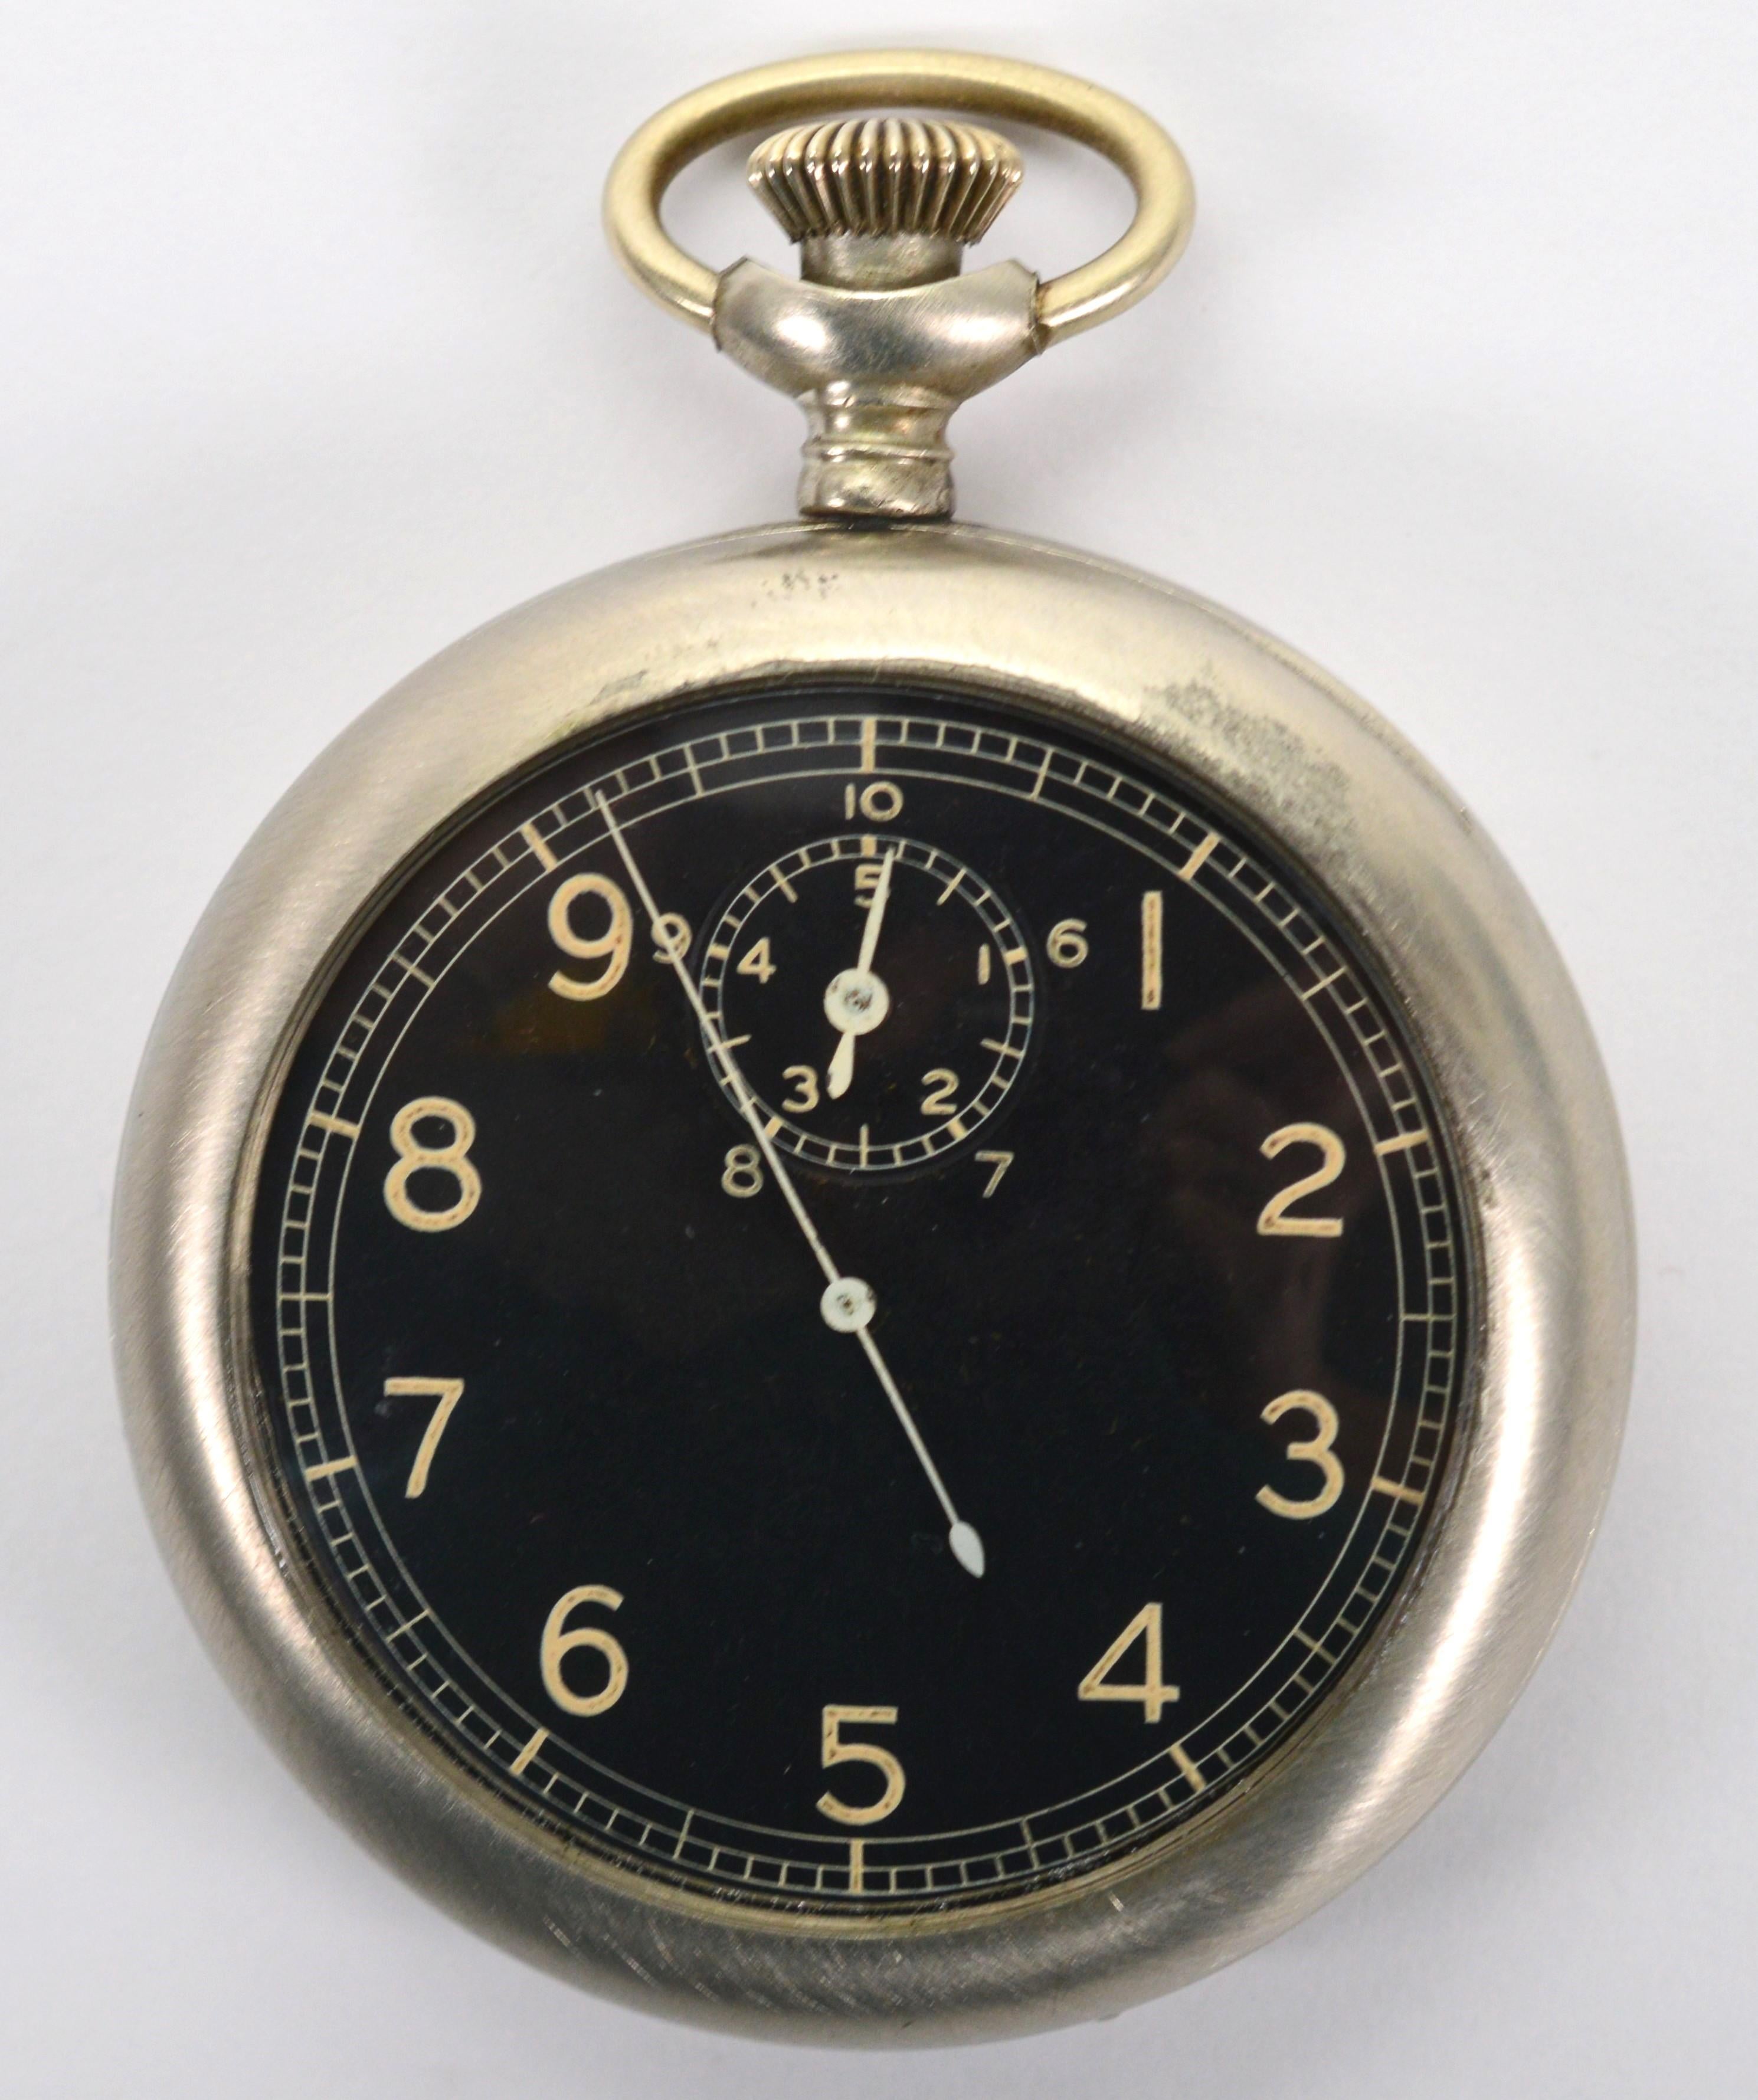 Own a timepiece of history with this rare find military stop watch designed exclusively for timing a bomb drop. United States Army Air Force Ordinance World War II Bombardier's one tenth second Stop Watch Contract Type A8, Number 39948954. Size 18S